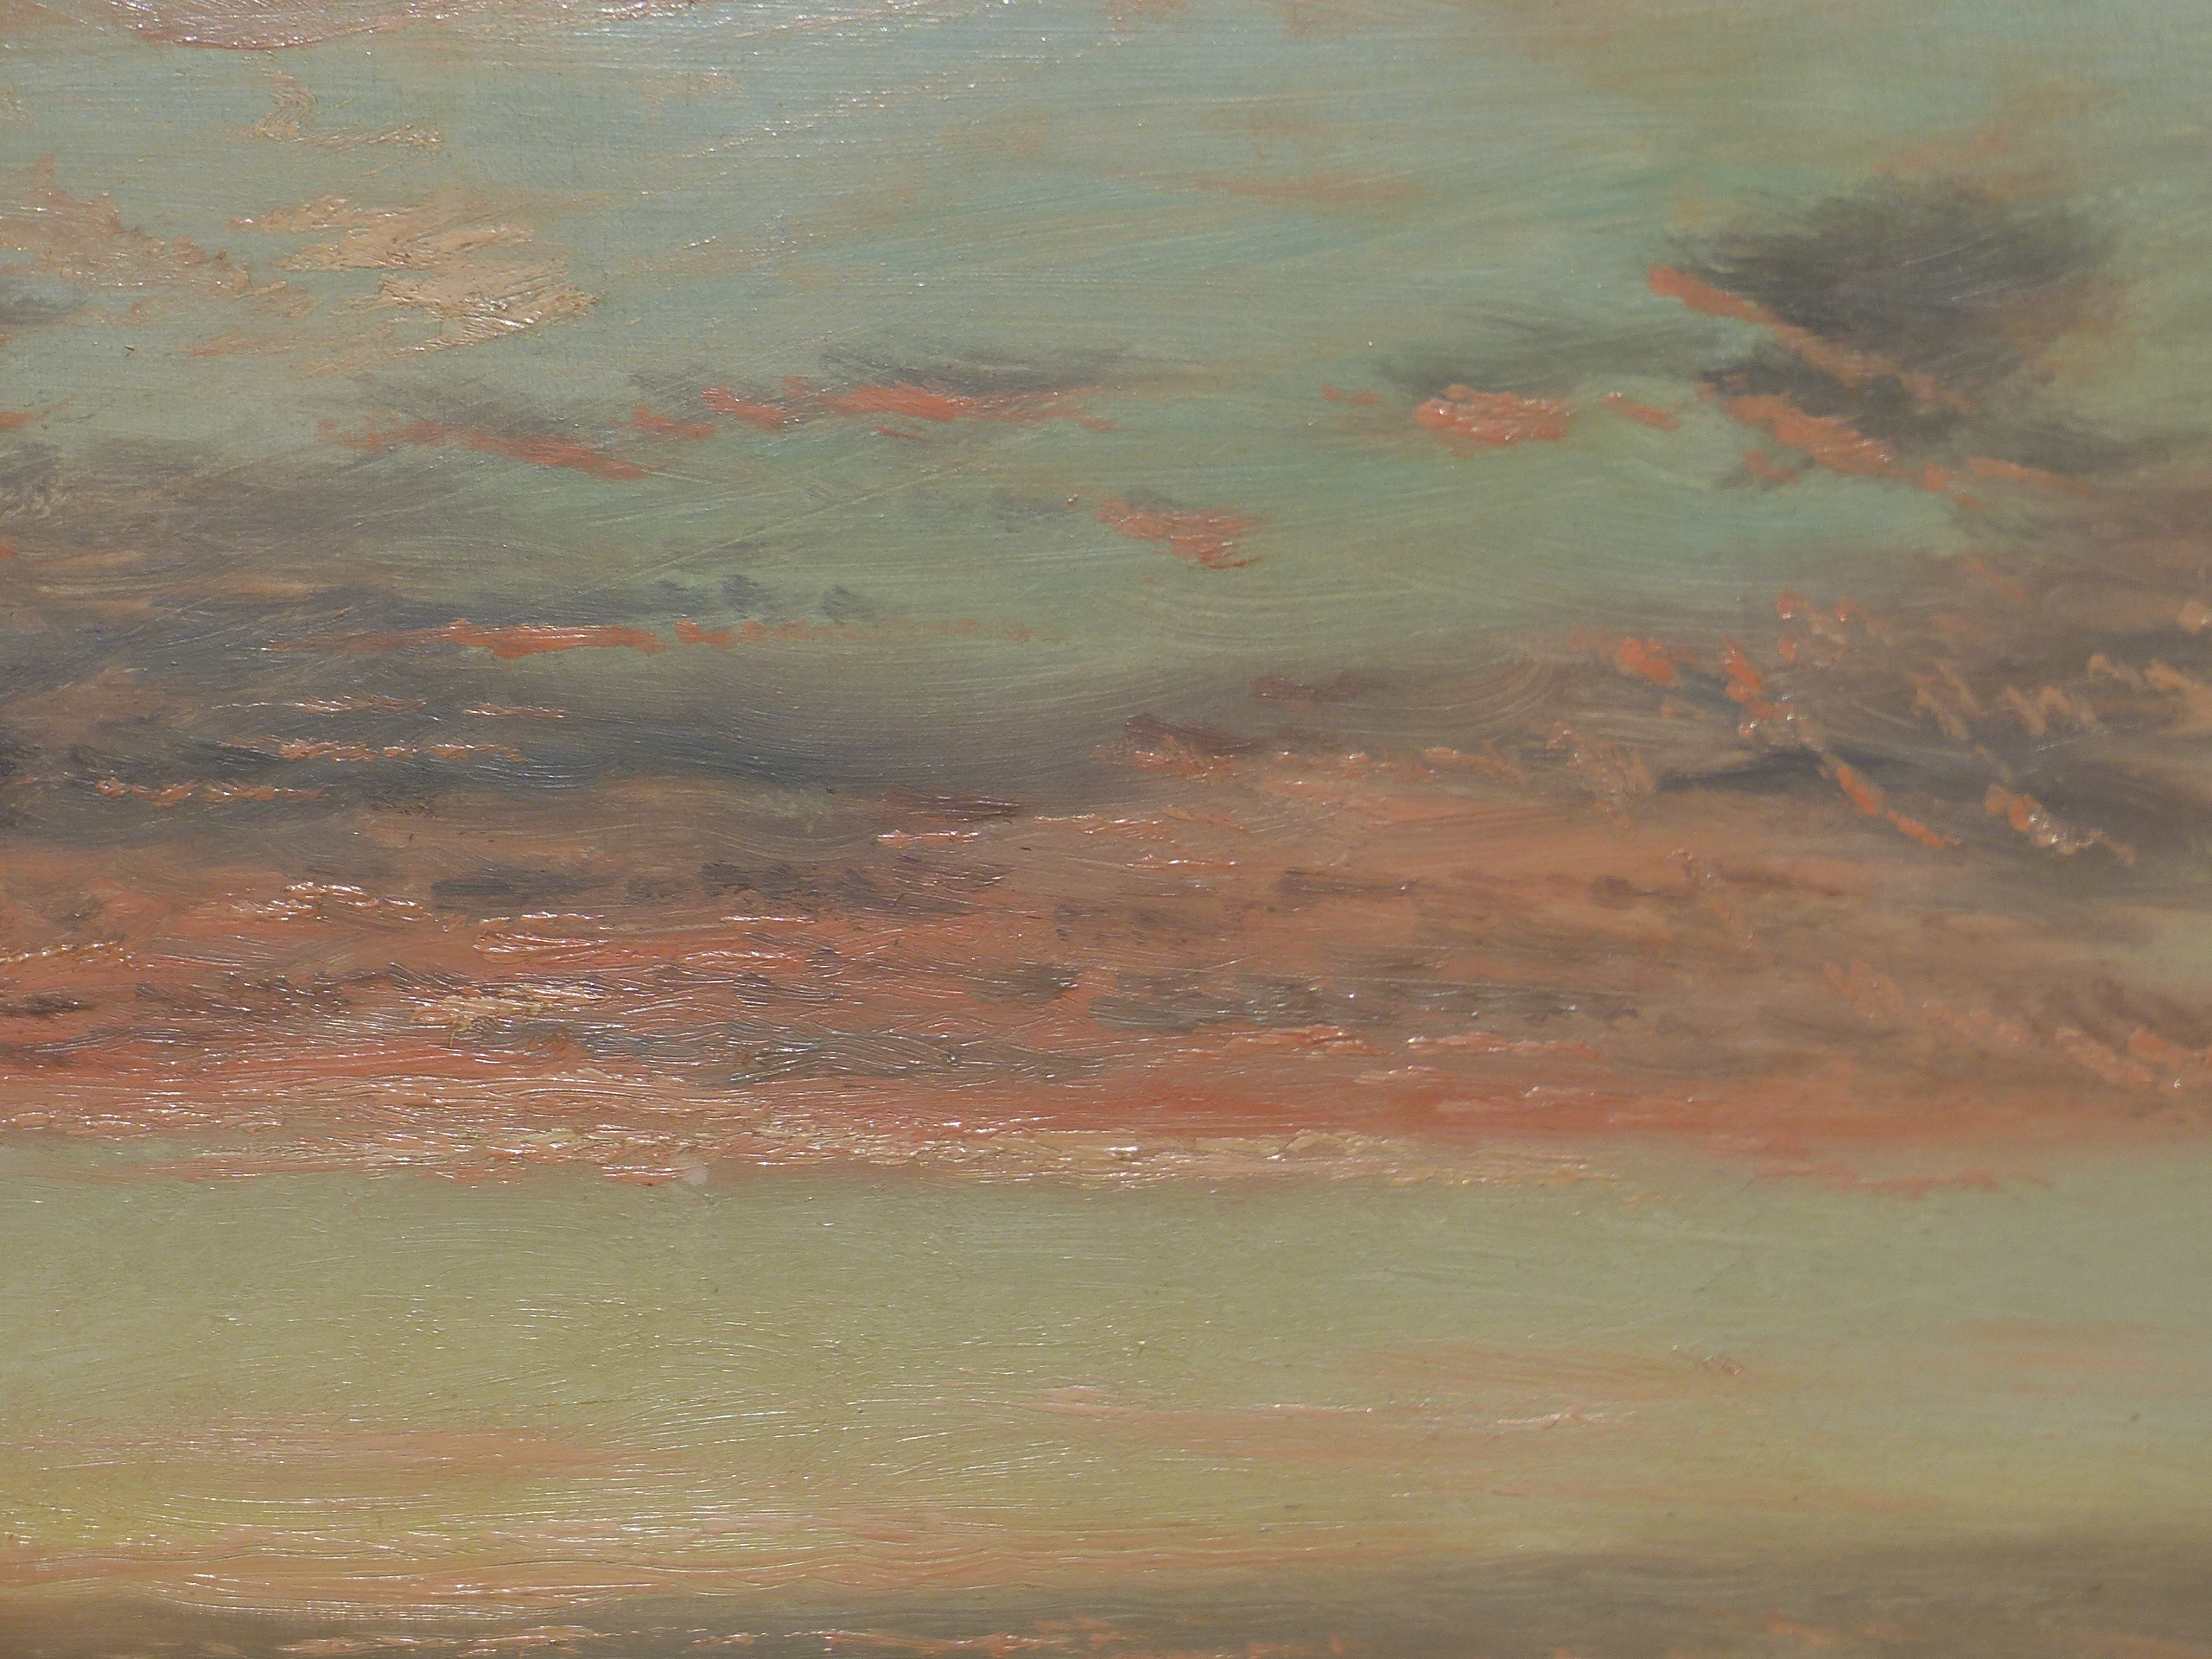 D SHERRIN (1868 - 1940) EVENING GLOW. SIGNED OIL ON CANVAS. 51 x 77 cm - Image 5 of 8